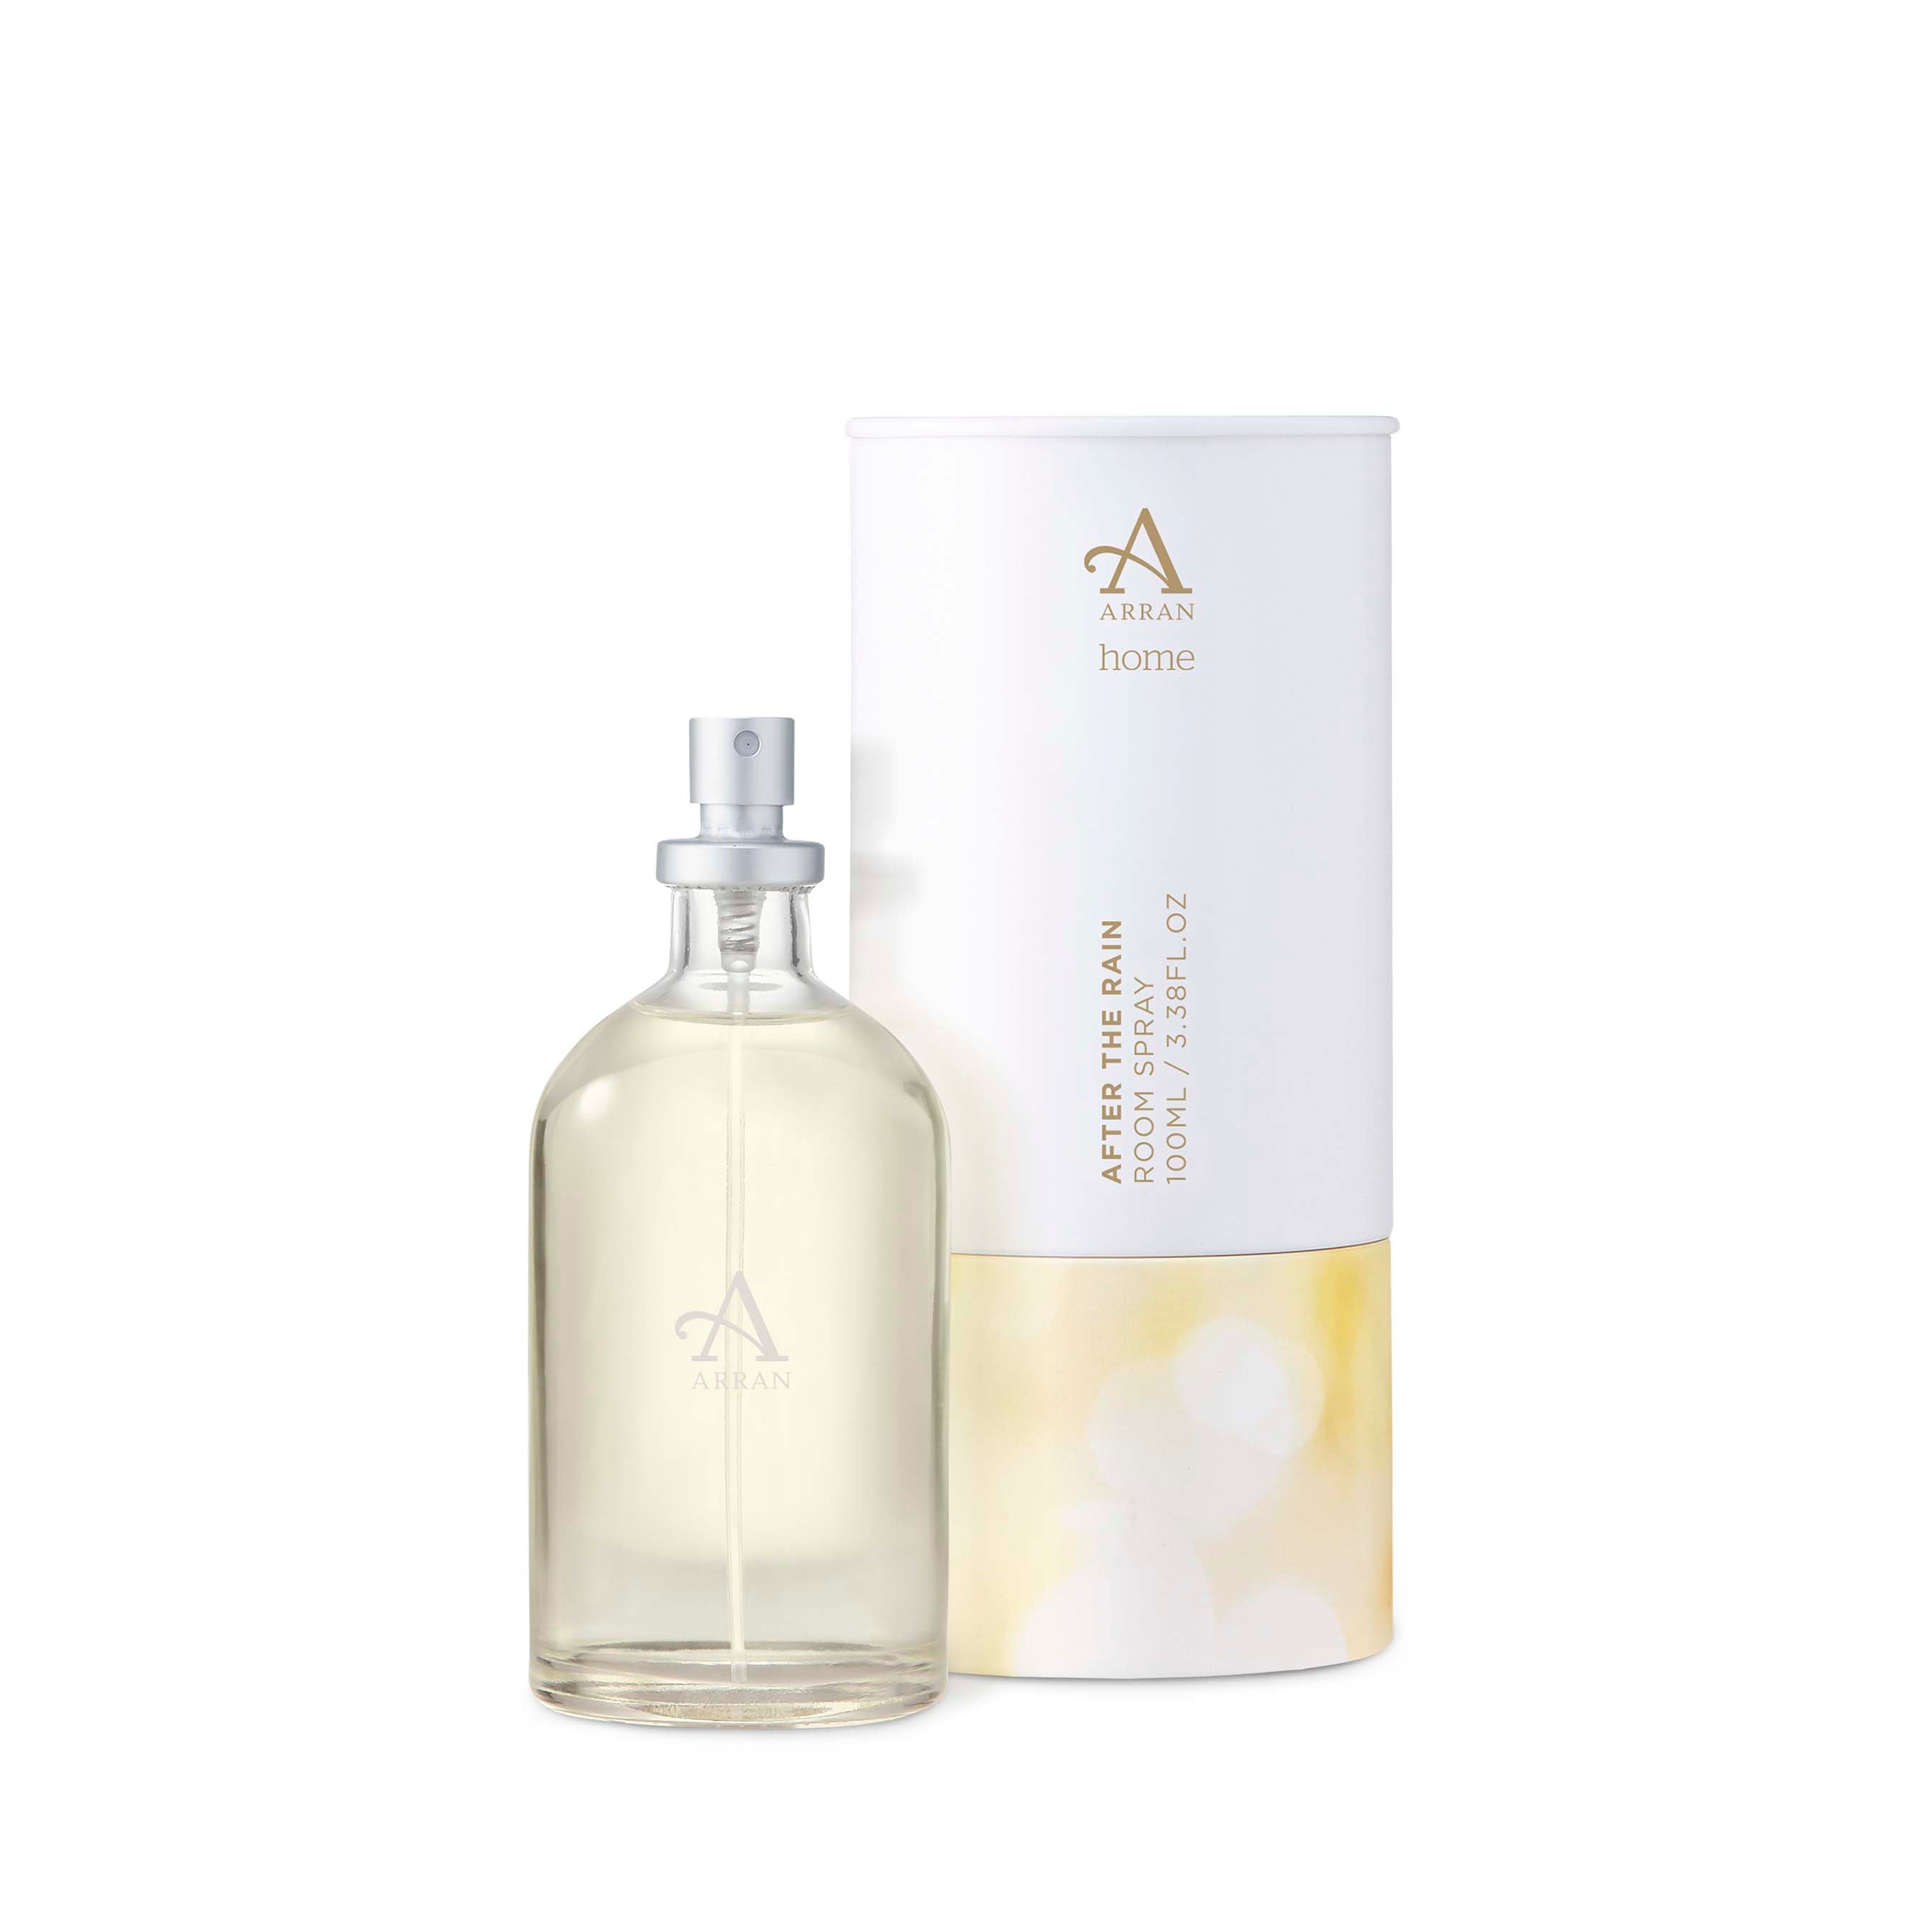 An image of ARRAN After the Rain 100ml Room Spray | Made in Scotland | Lime, Rose & Sandalwo...